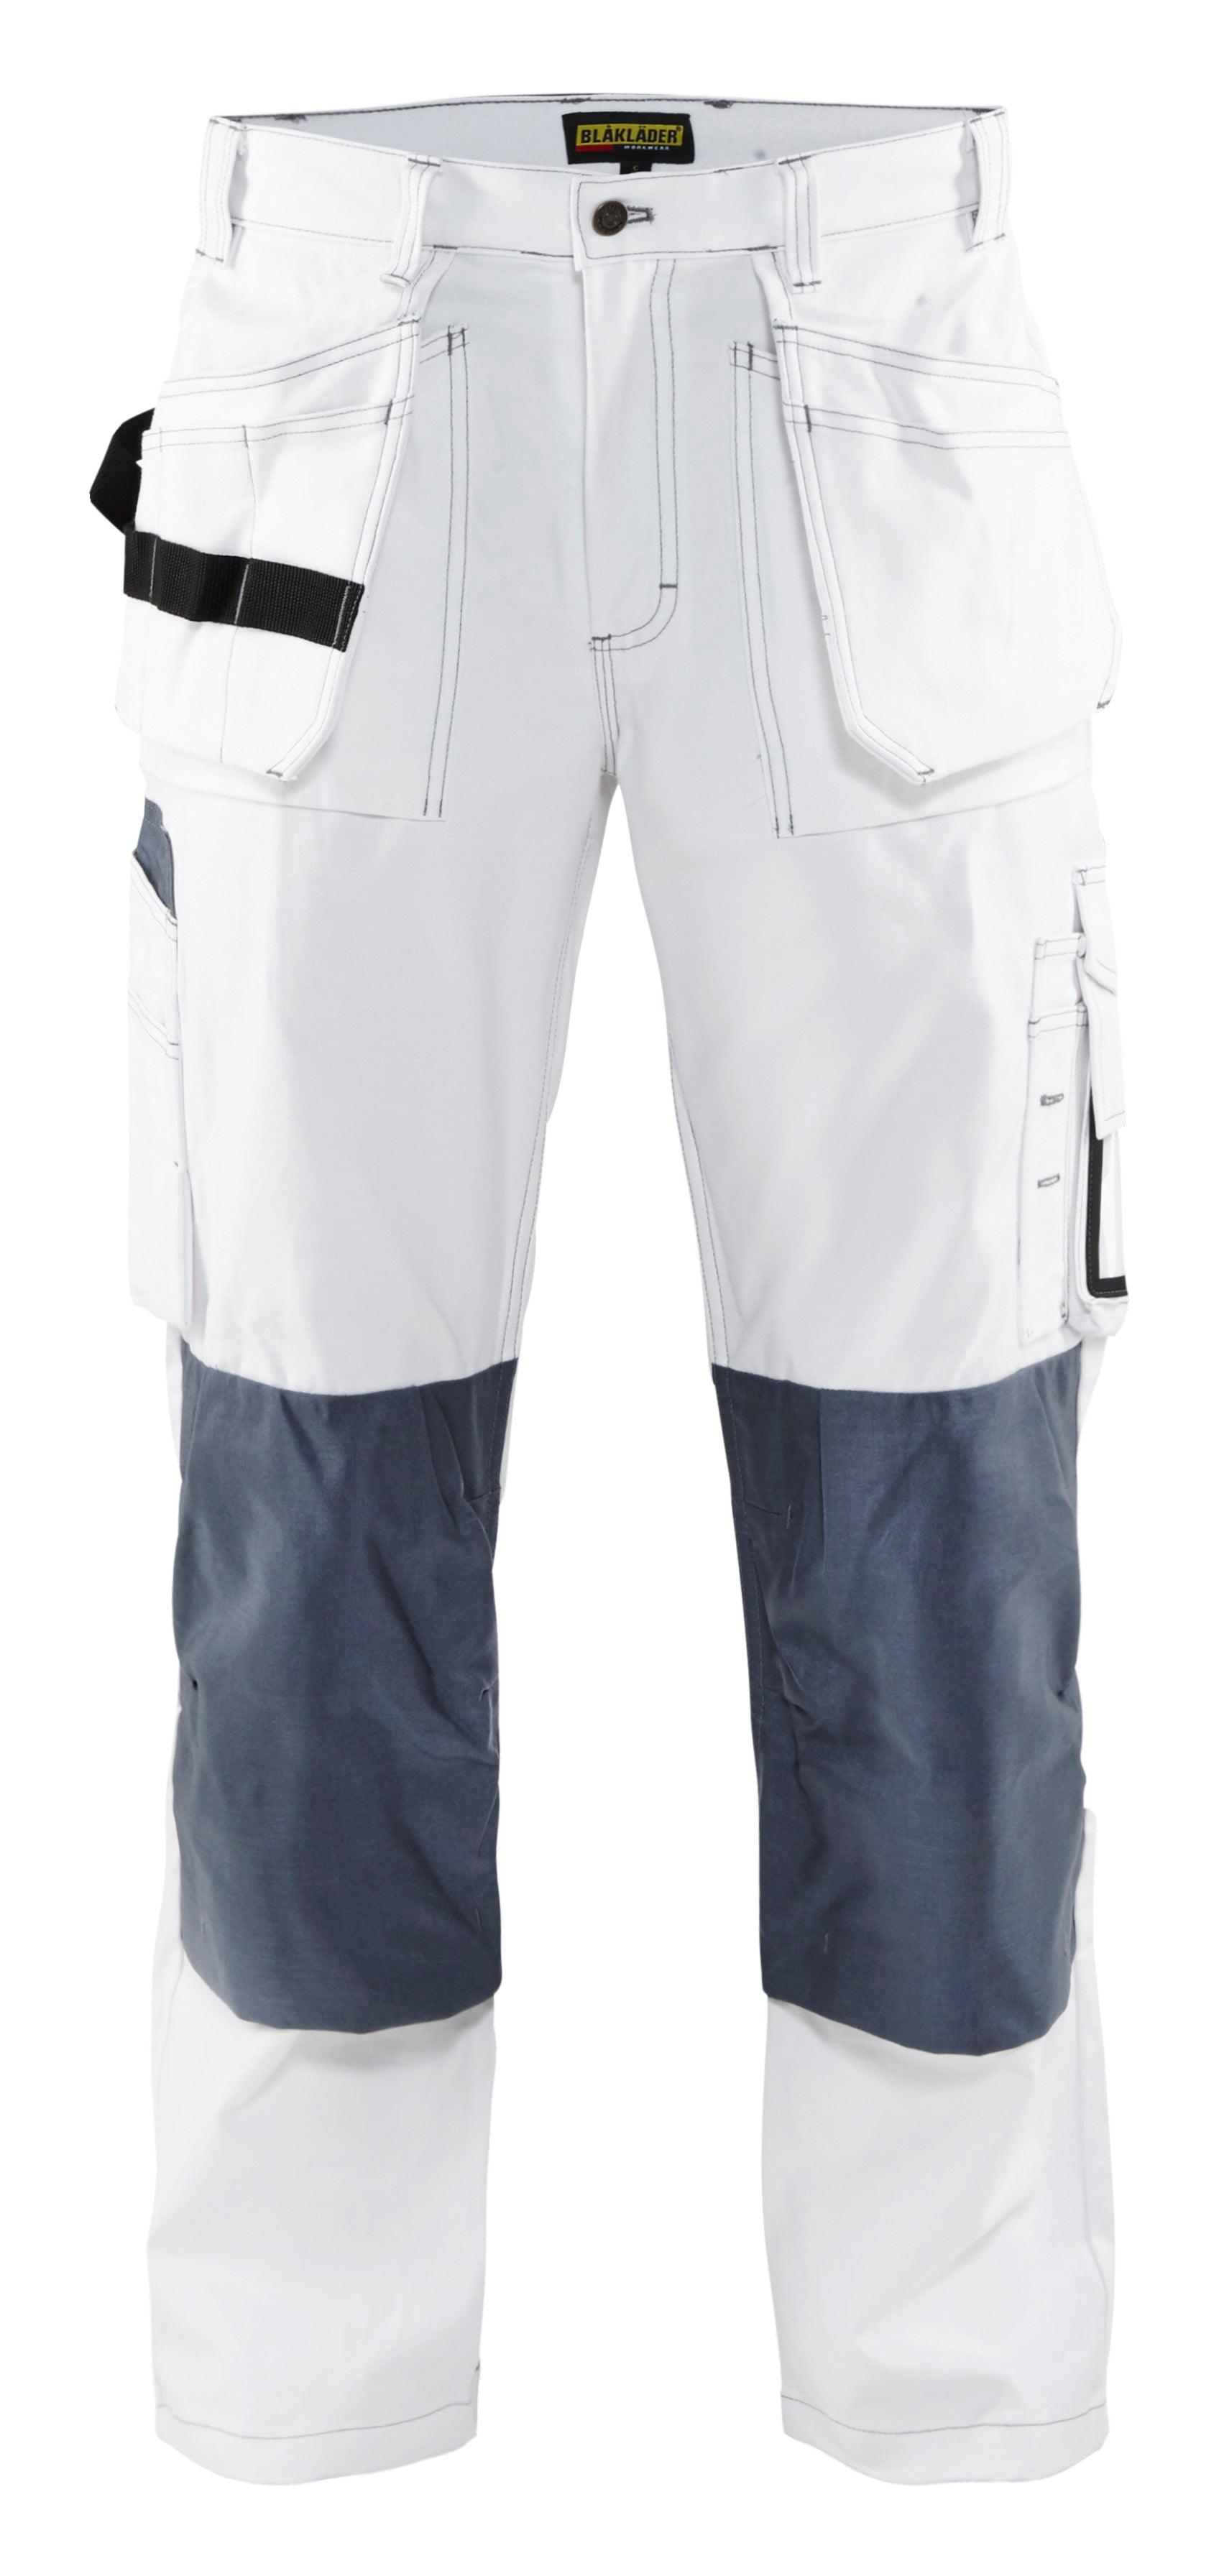 Blaklader 1631 9oz Cotton Painter Pants with Utility Pockets - White - Trusted Gear Company LLC